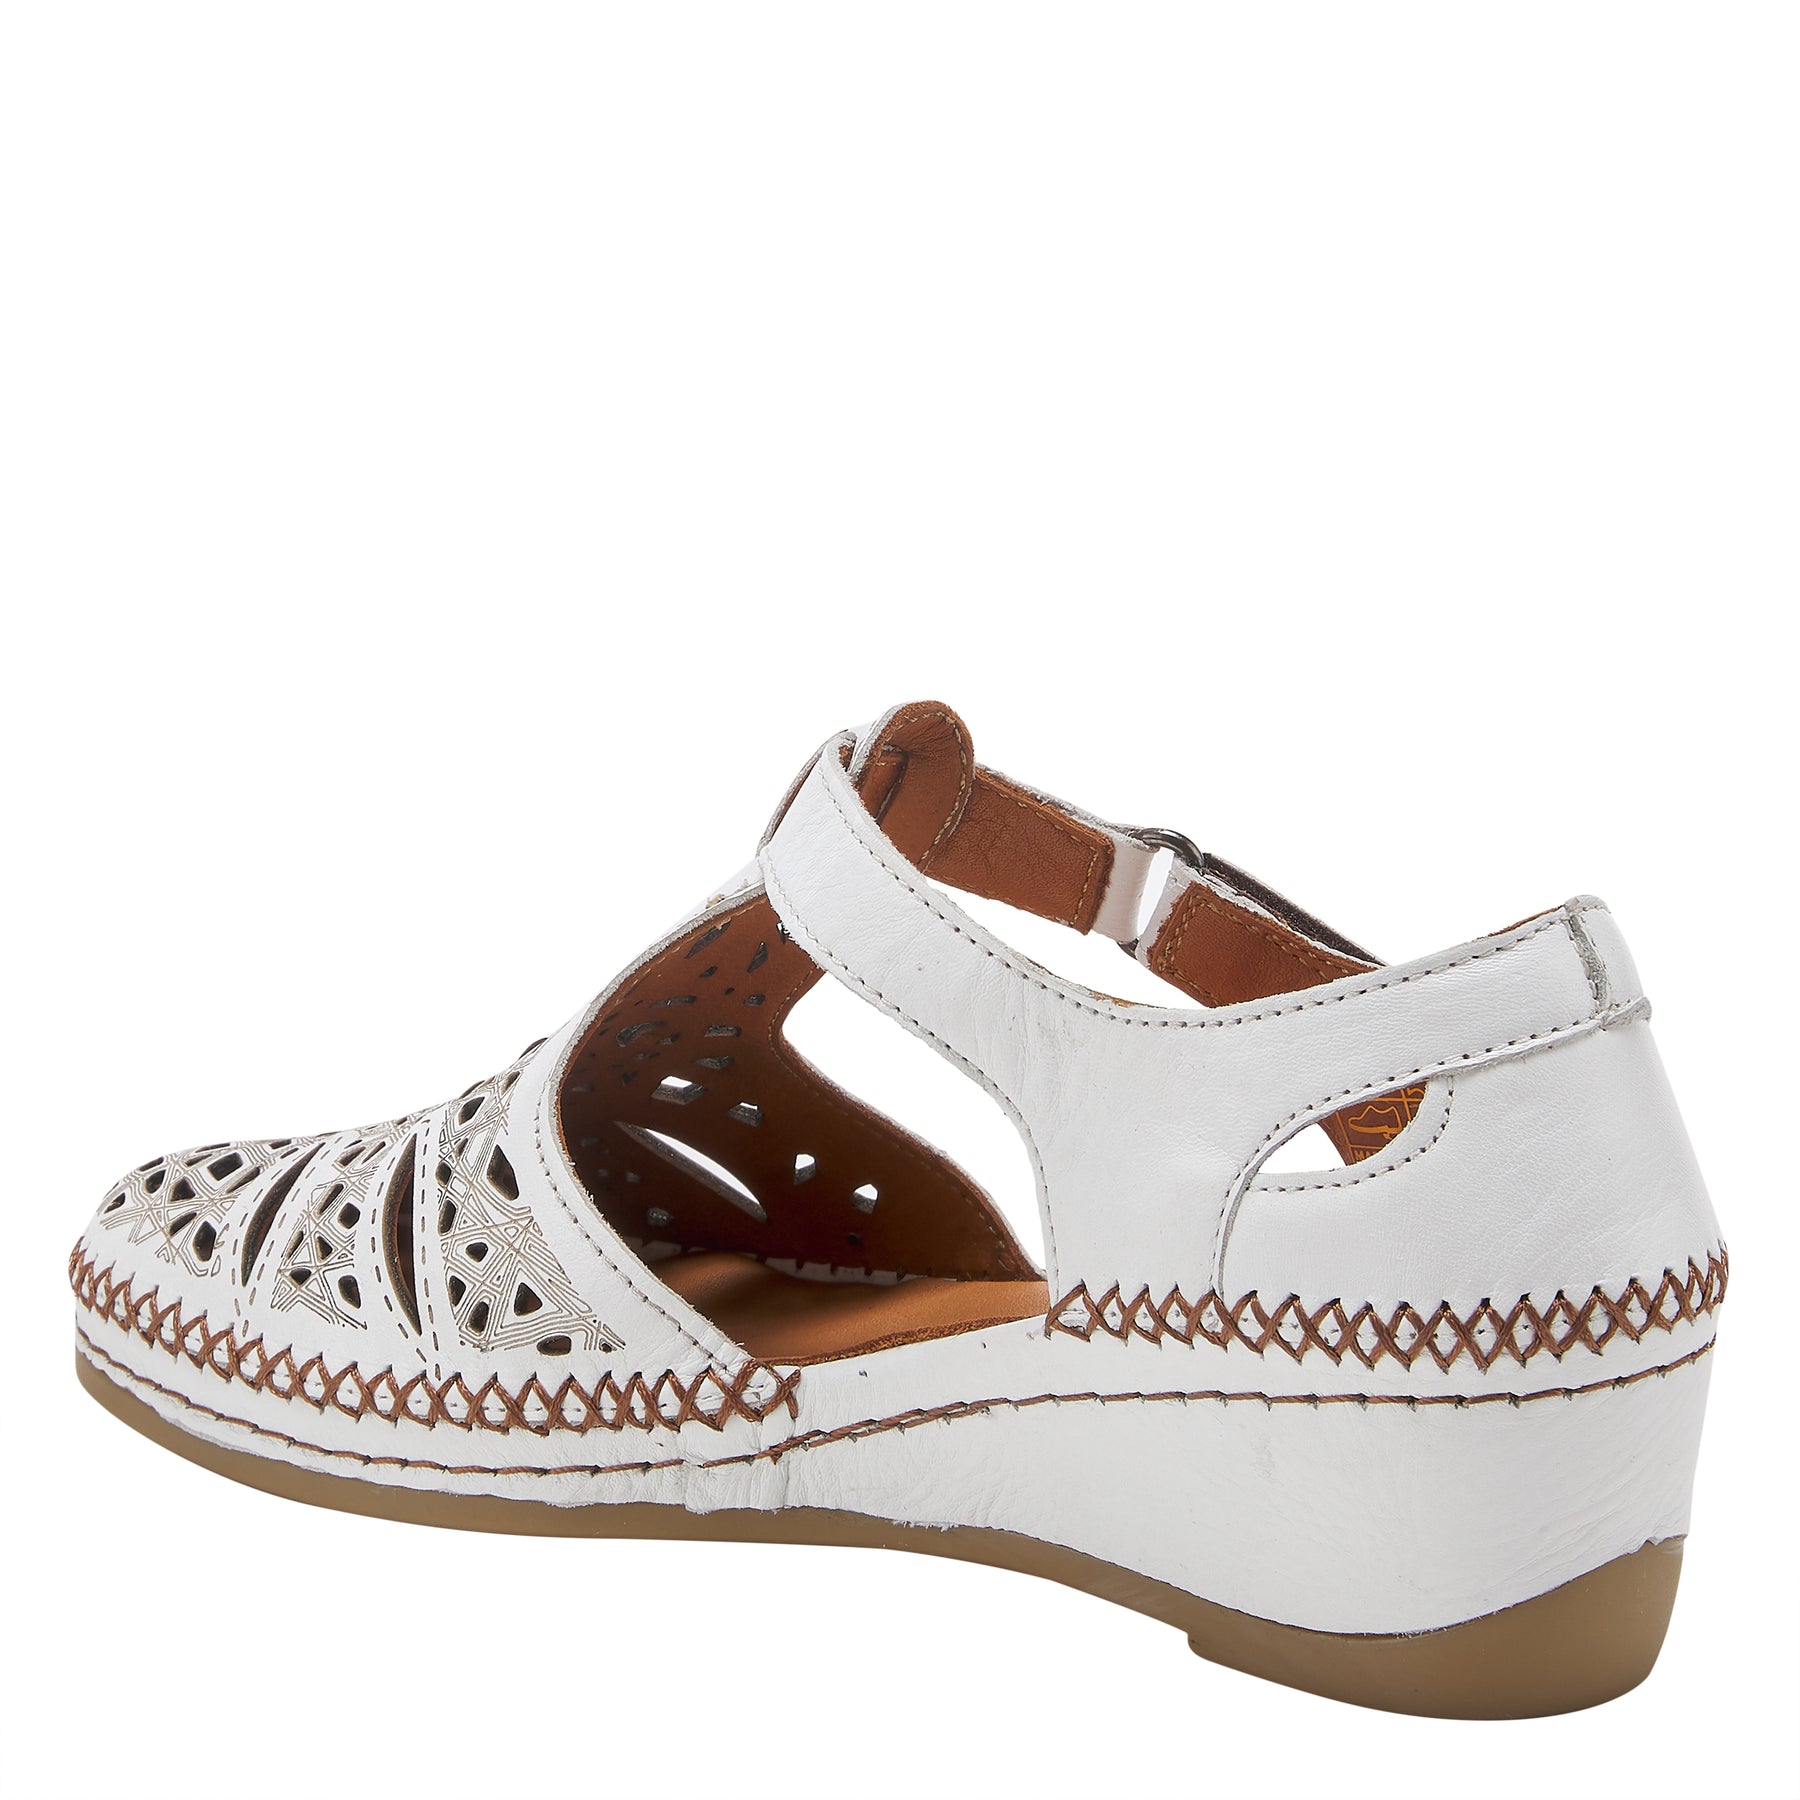 IRIN SHOE by SPRING STEP – Spring Step Shoes